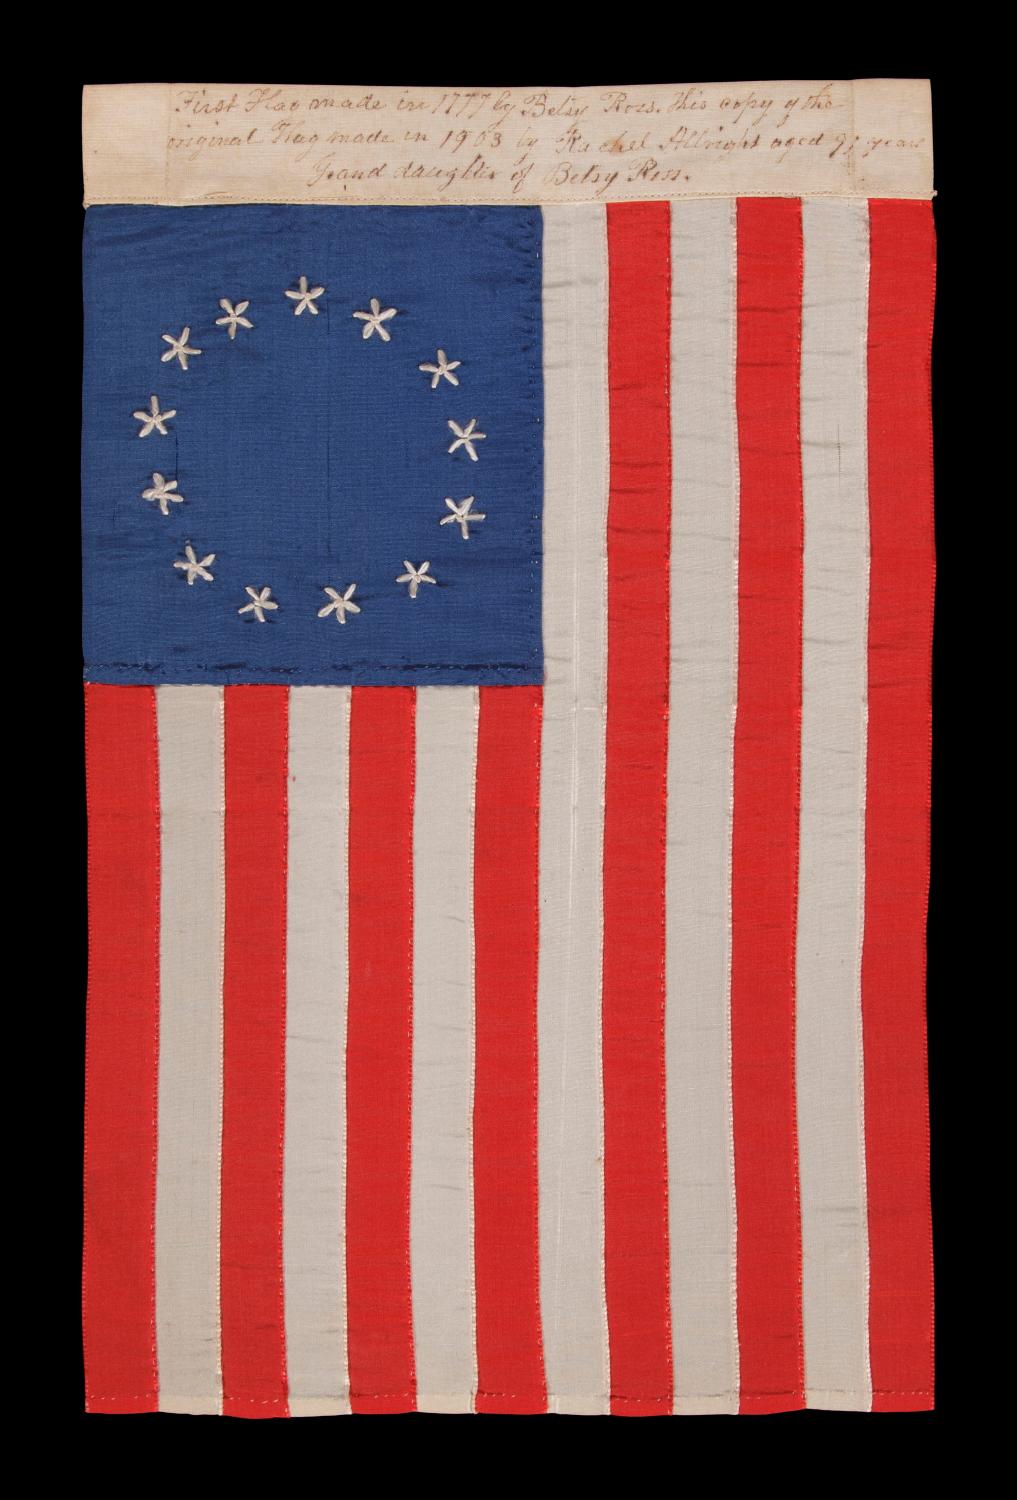 13 HAND-EMBROIDERED STARS AND EXPERTLY HAND SEWN STRIPES ON AN ANTIQUE AMERICAN FLAG MADE IN PHILADELPHIA IN BY RACHEL ALBRIGHT, GRANDDAUGHTER OF BETSY ROSS, SIGNED AND DATED 1903:

13 star American national flag, entirely hand sewn by Rachel Wilson